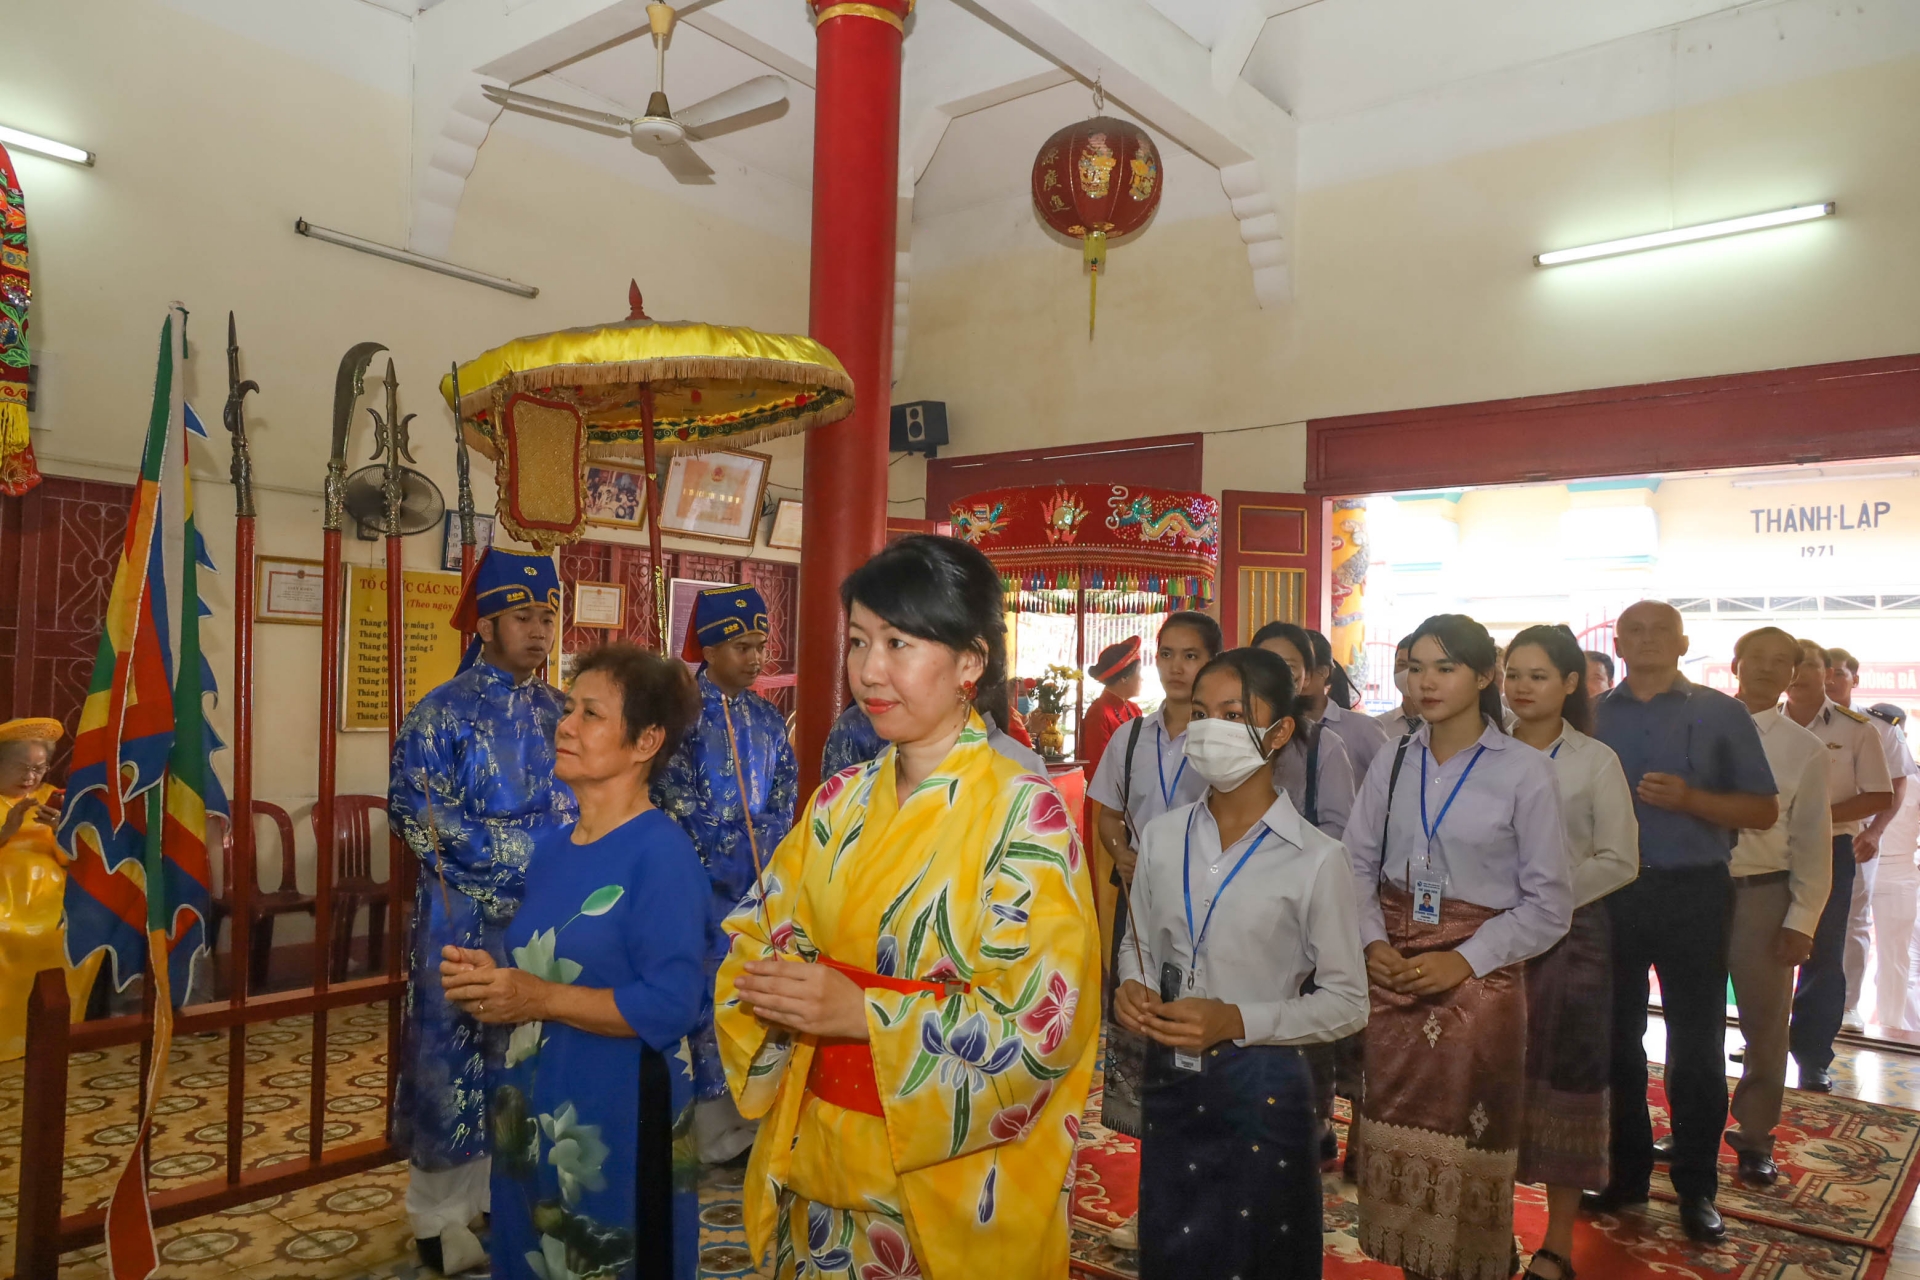 Many expatriates and foreigners living in Nha Trang attend the ceremony.
